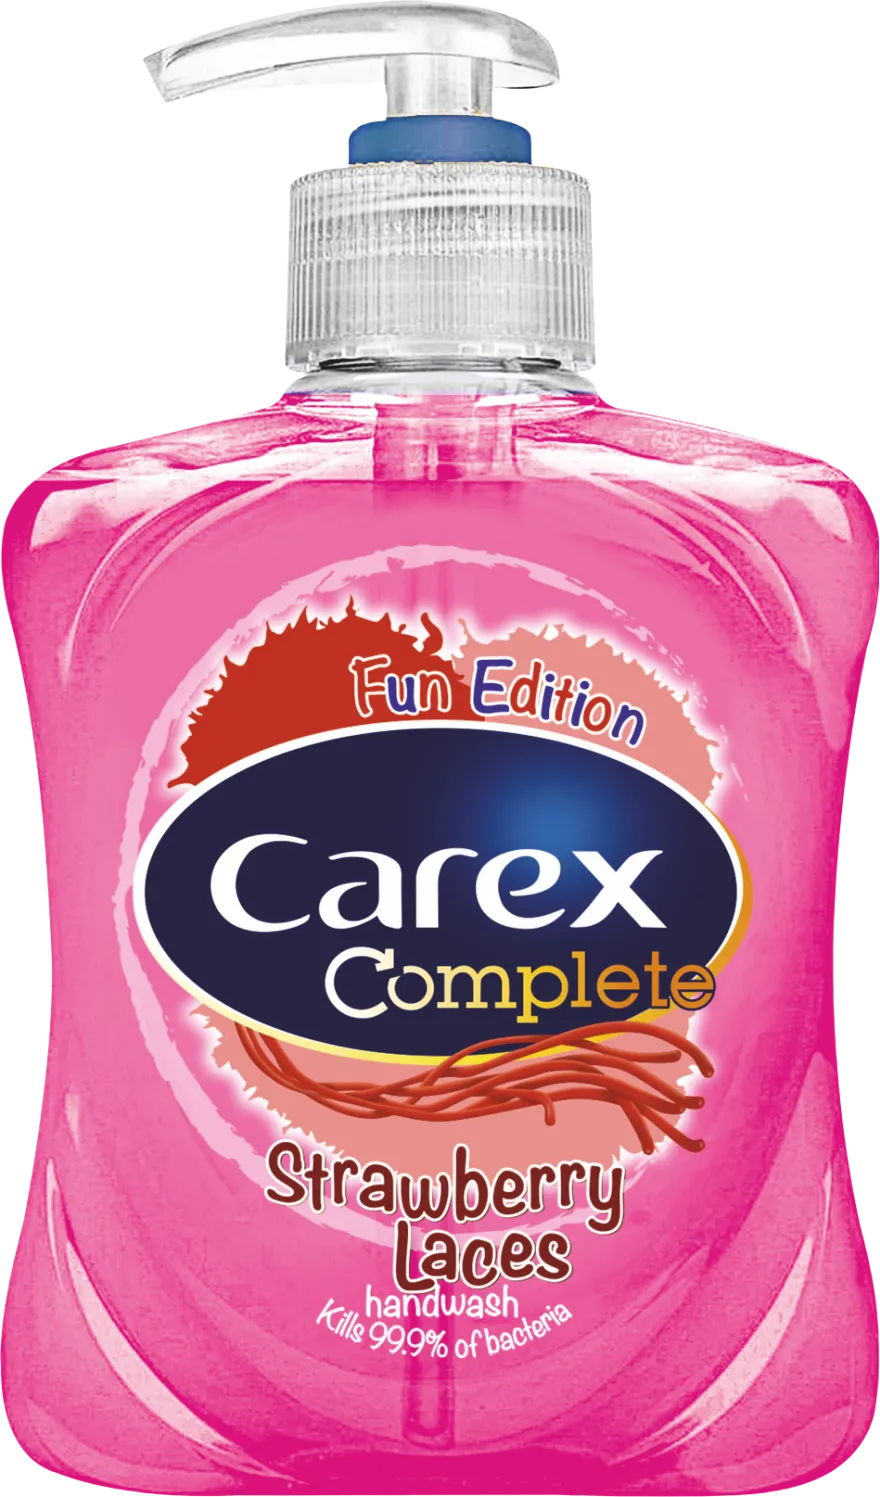 Жидкое мыло Carex Complete Strawberry Laces (Fun Edition)#1